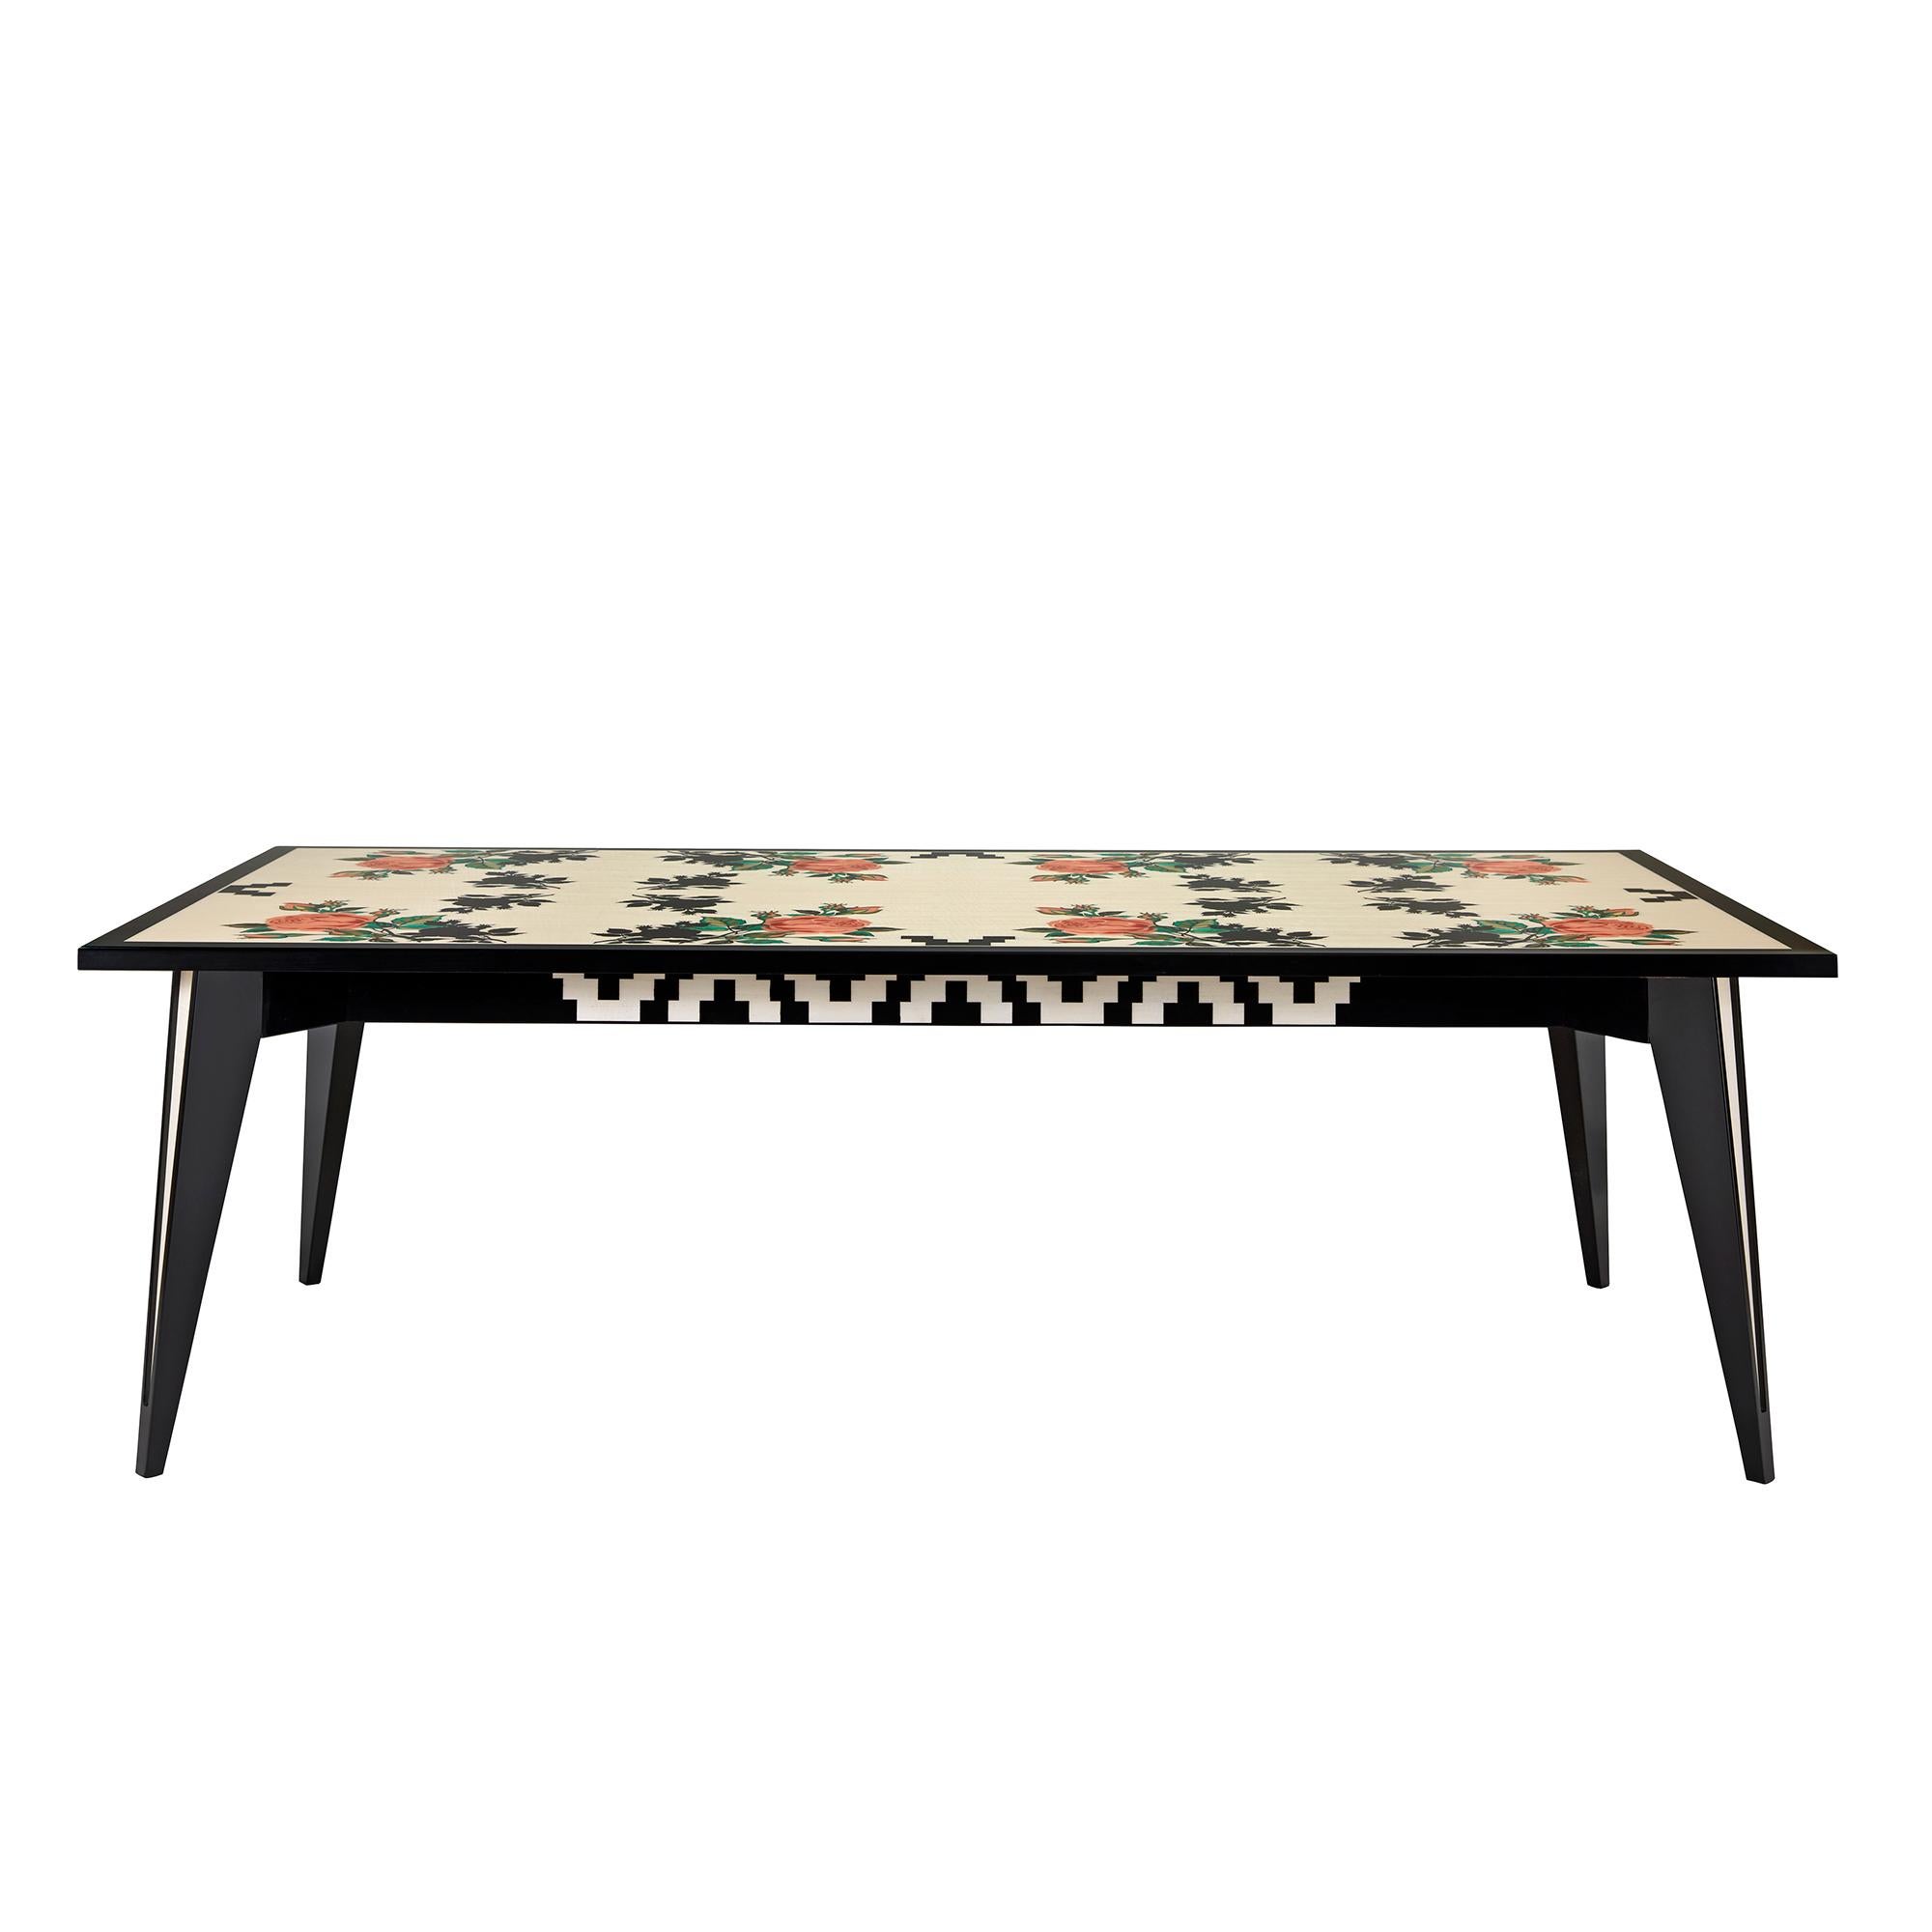 Colored roses superimposed on black roses create a pattern for this tabletop. Top with wood veneer inlays in ten colors. Solid beech legs with black ivory wood veneer and a white line on the side. Under the top, a decoration of black and white wood